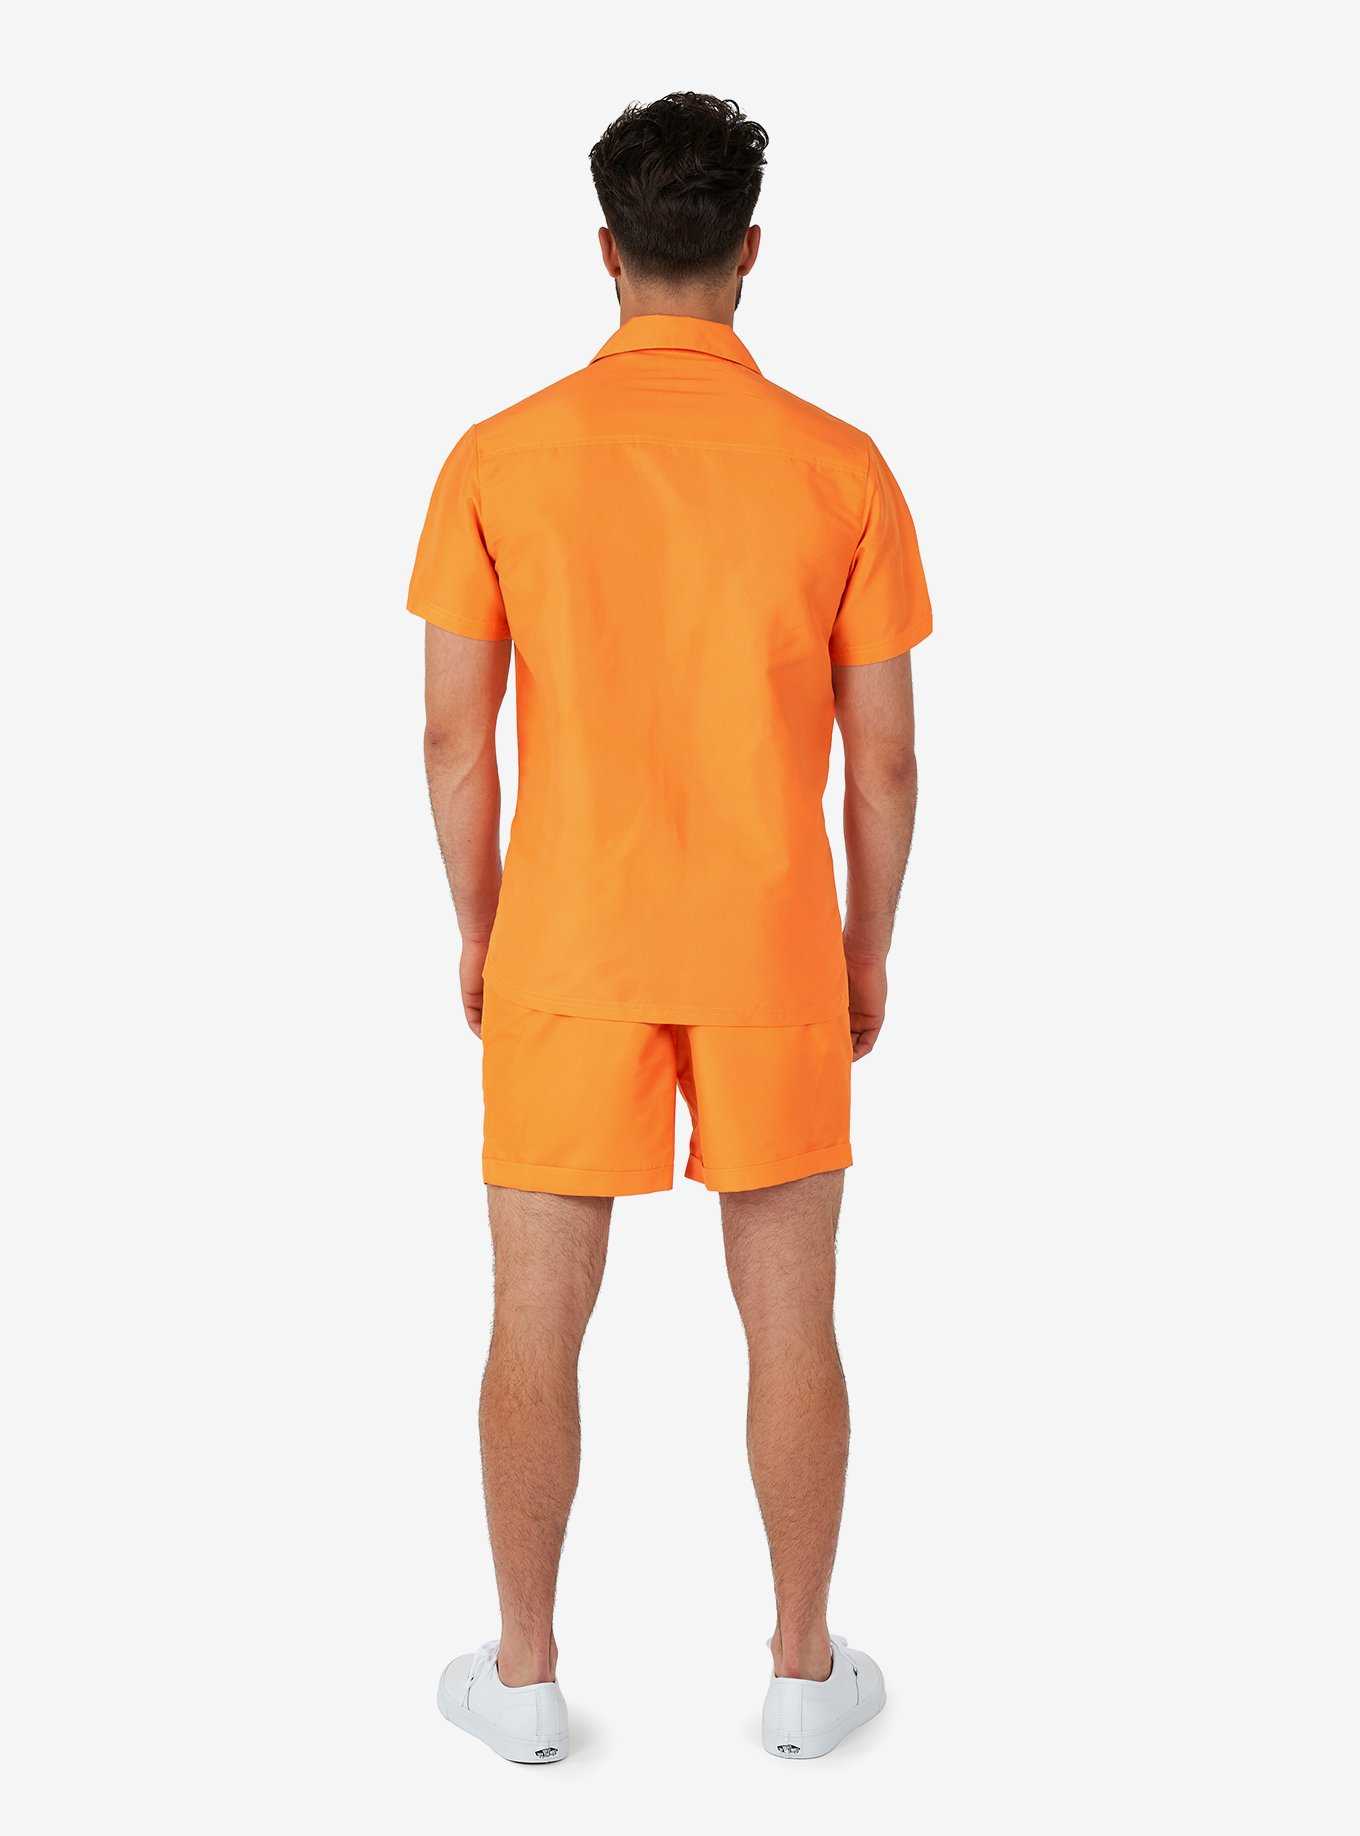 The Orange Summer Button-Up Shirt and Short, , hi-res